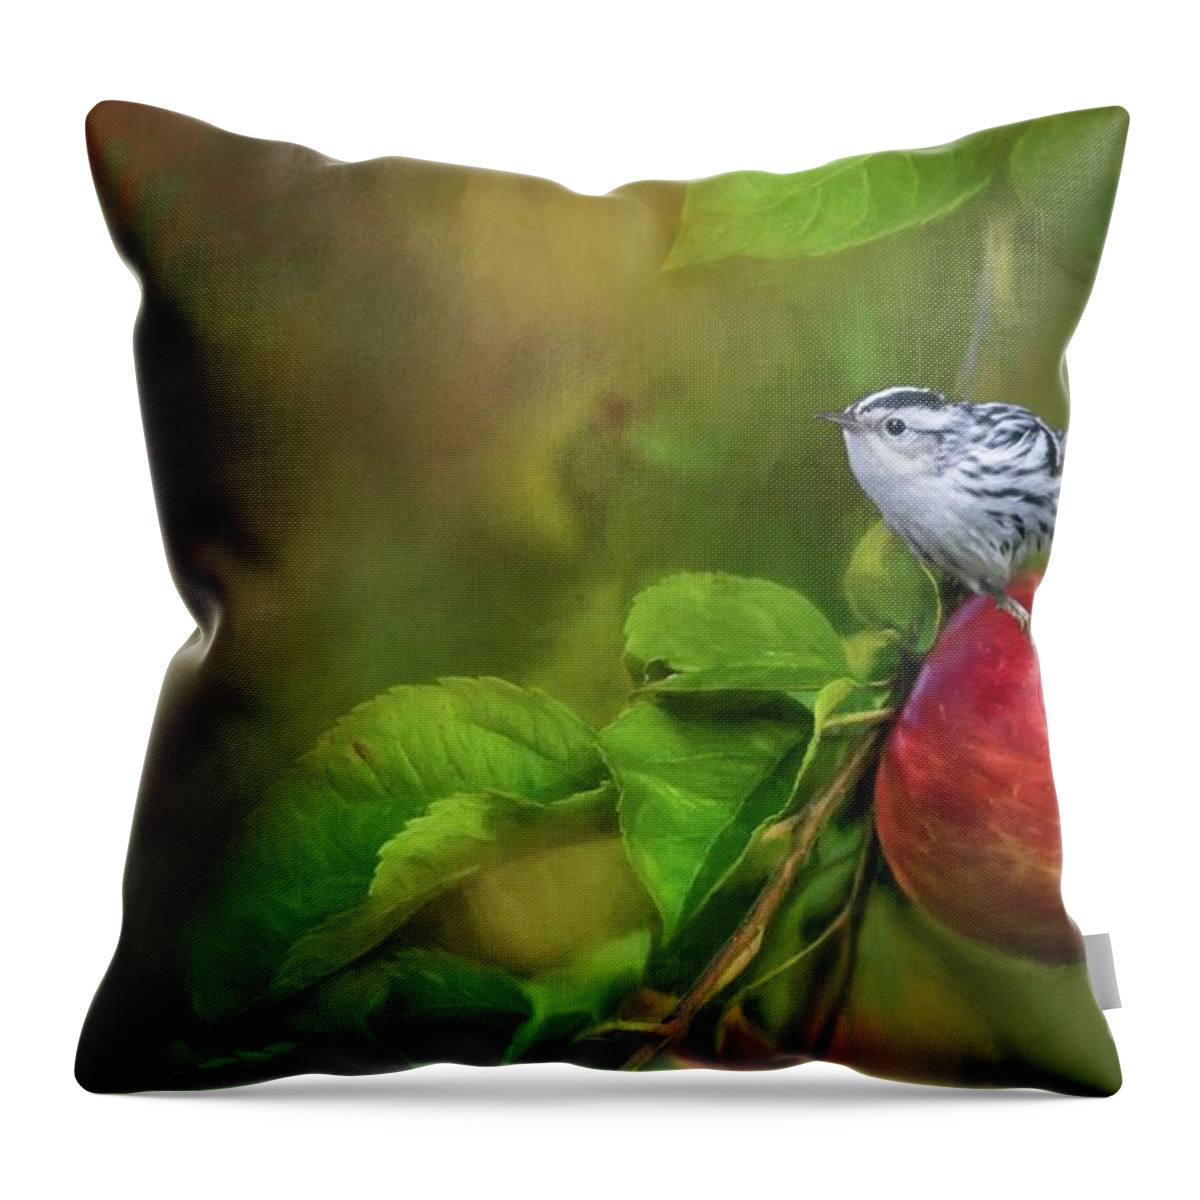 Black And White Warbler Throw Pillow featuring the photograph Sitting on an Apple by Eva Lechner